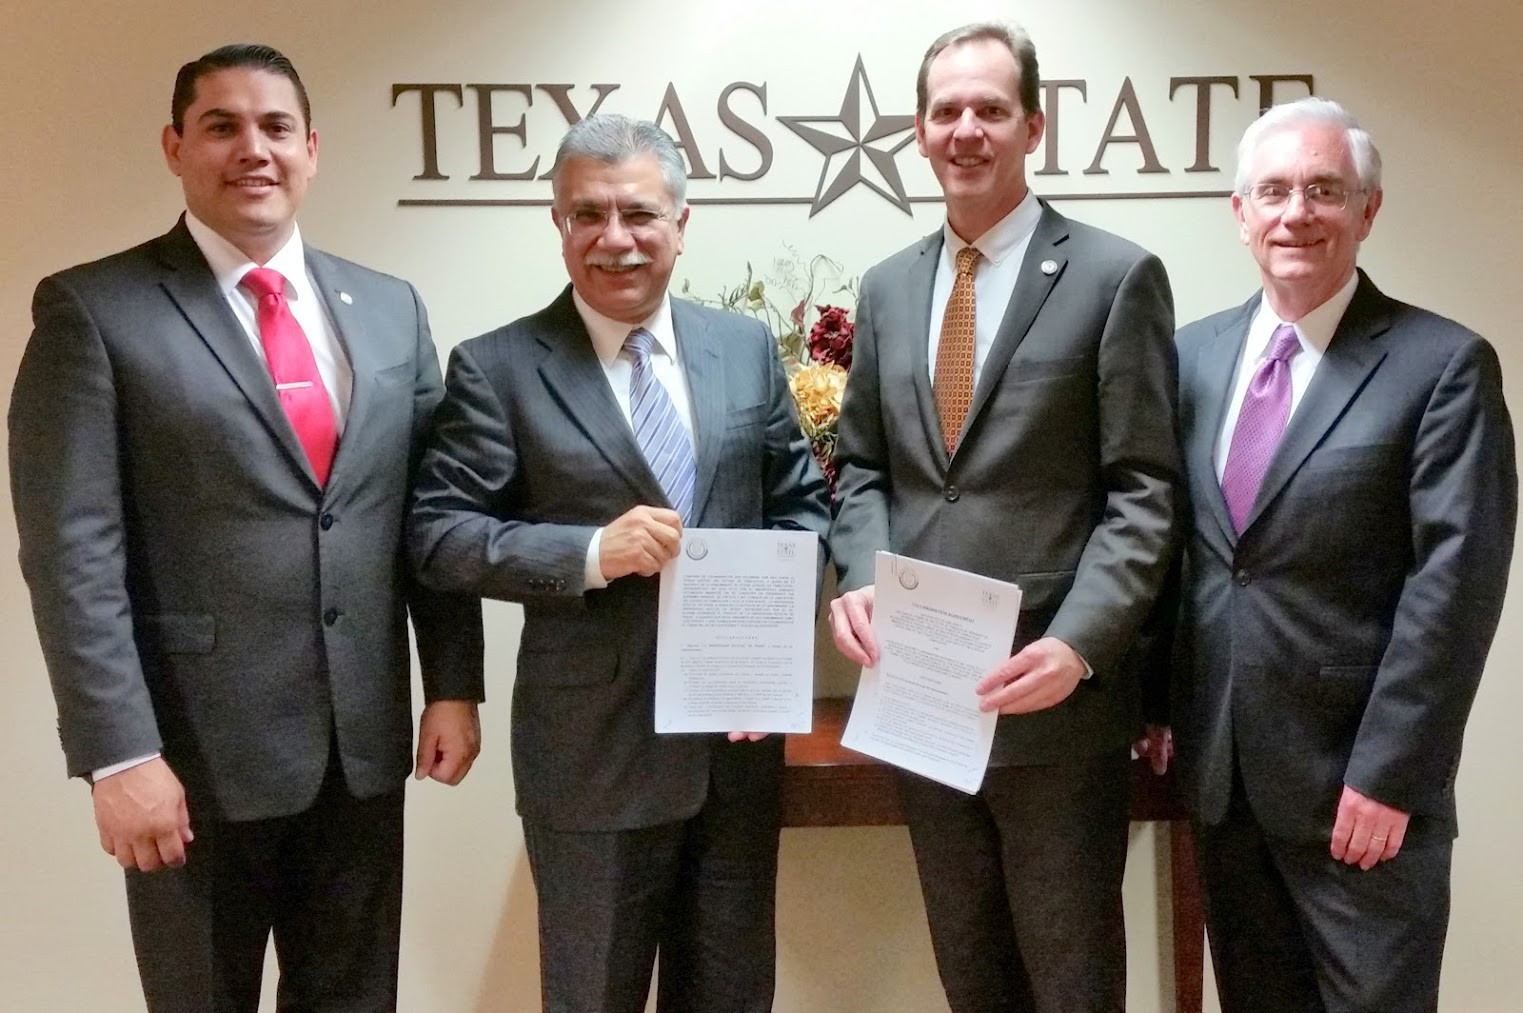 Lic. Roberto Montoya González (aide to Magistrado Armando Villanueva), Magistrado Armando Villanueva Mendoza (Chief Justice of the Supreme Court of Tamaulipas), Dr. Eugene Bourgeois (Provost of Texas State University), Dr. Walter A. Wright